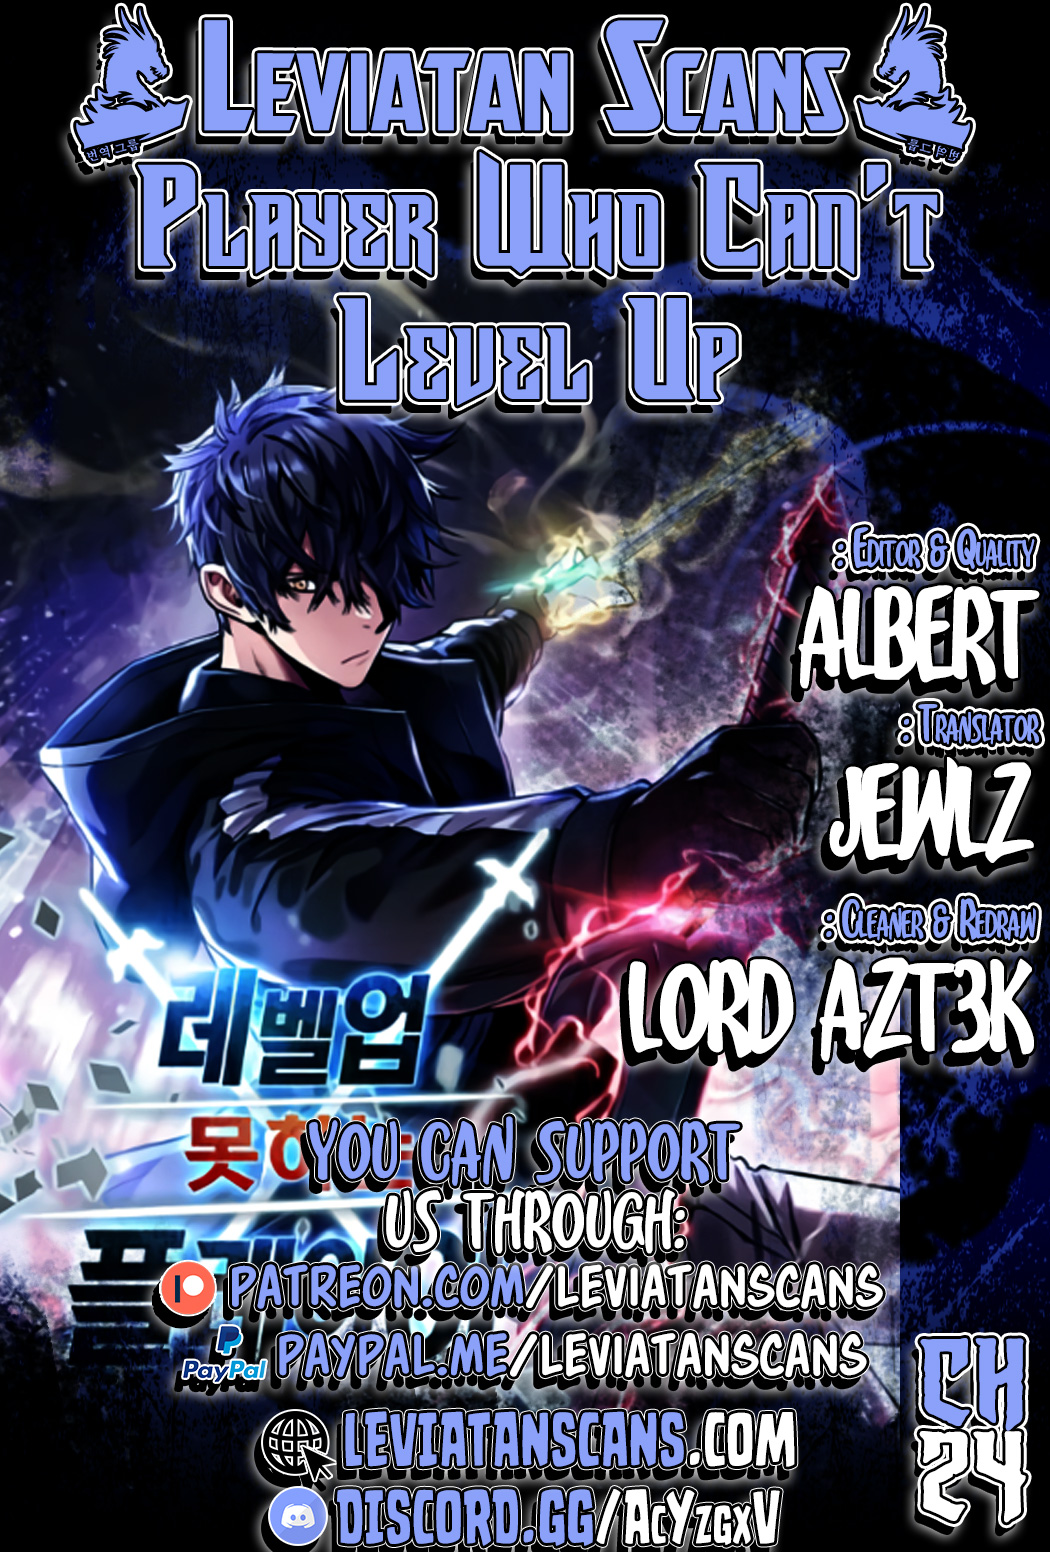 The Player That Can't Level Up - Chapter 2552 - Image 1